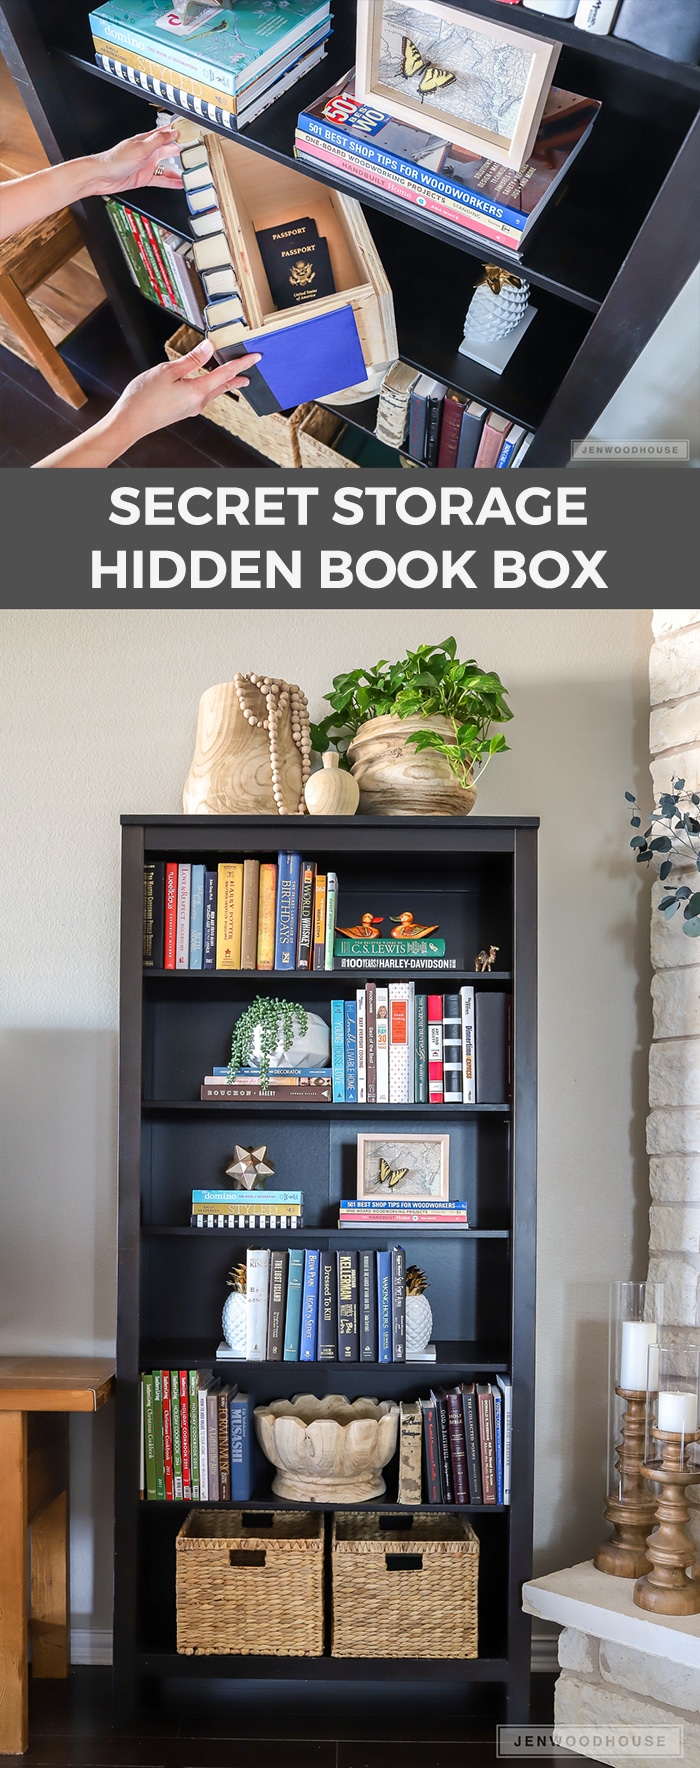 Hide valuables in plain sight and make this DIY secret storage hidden book box